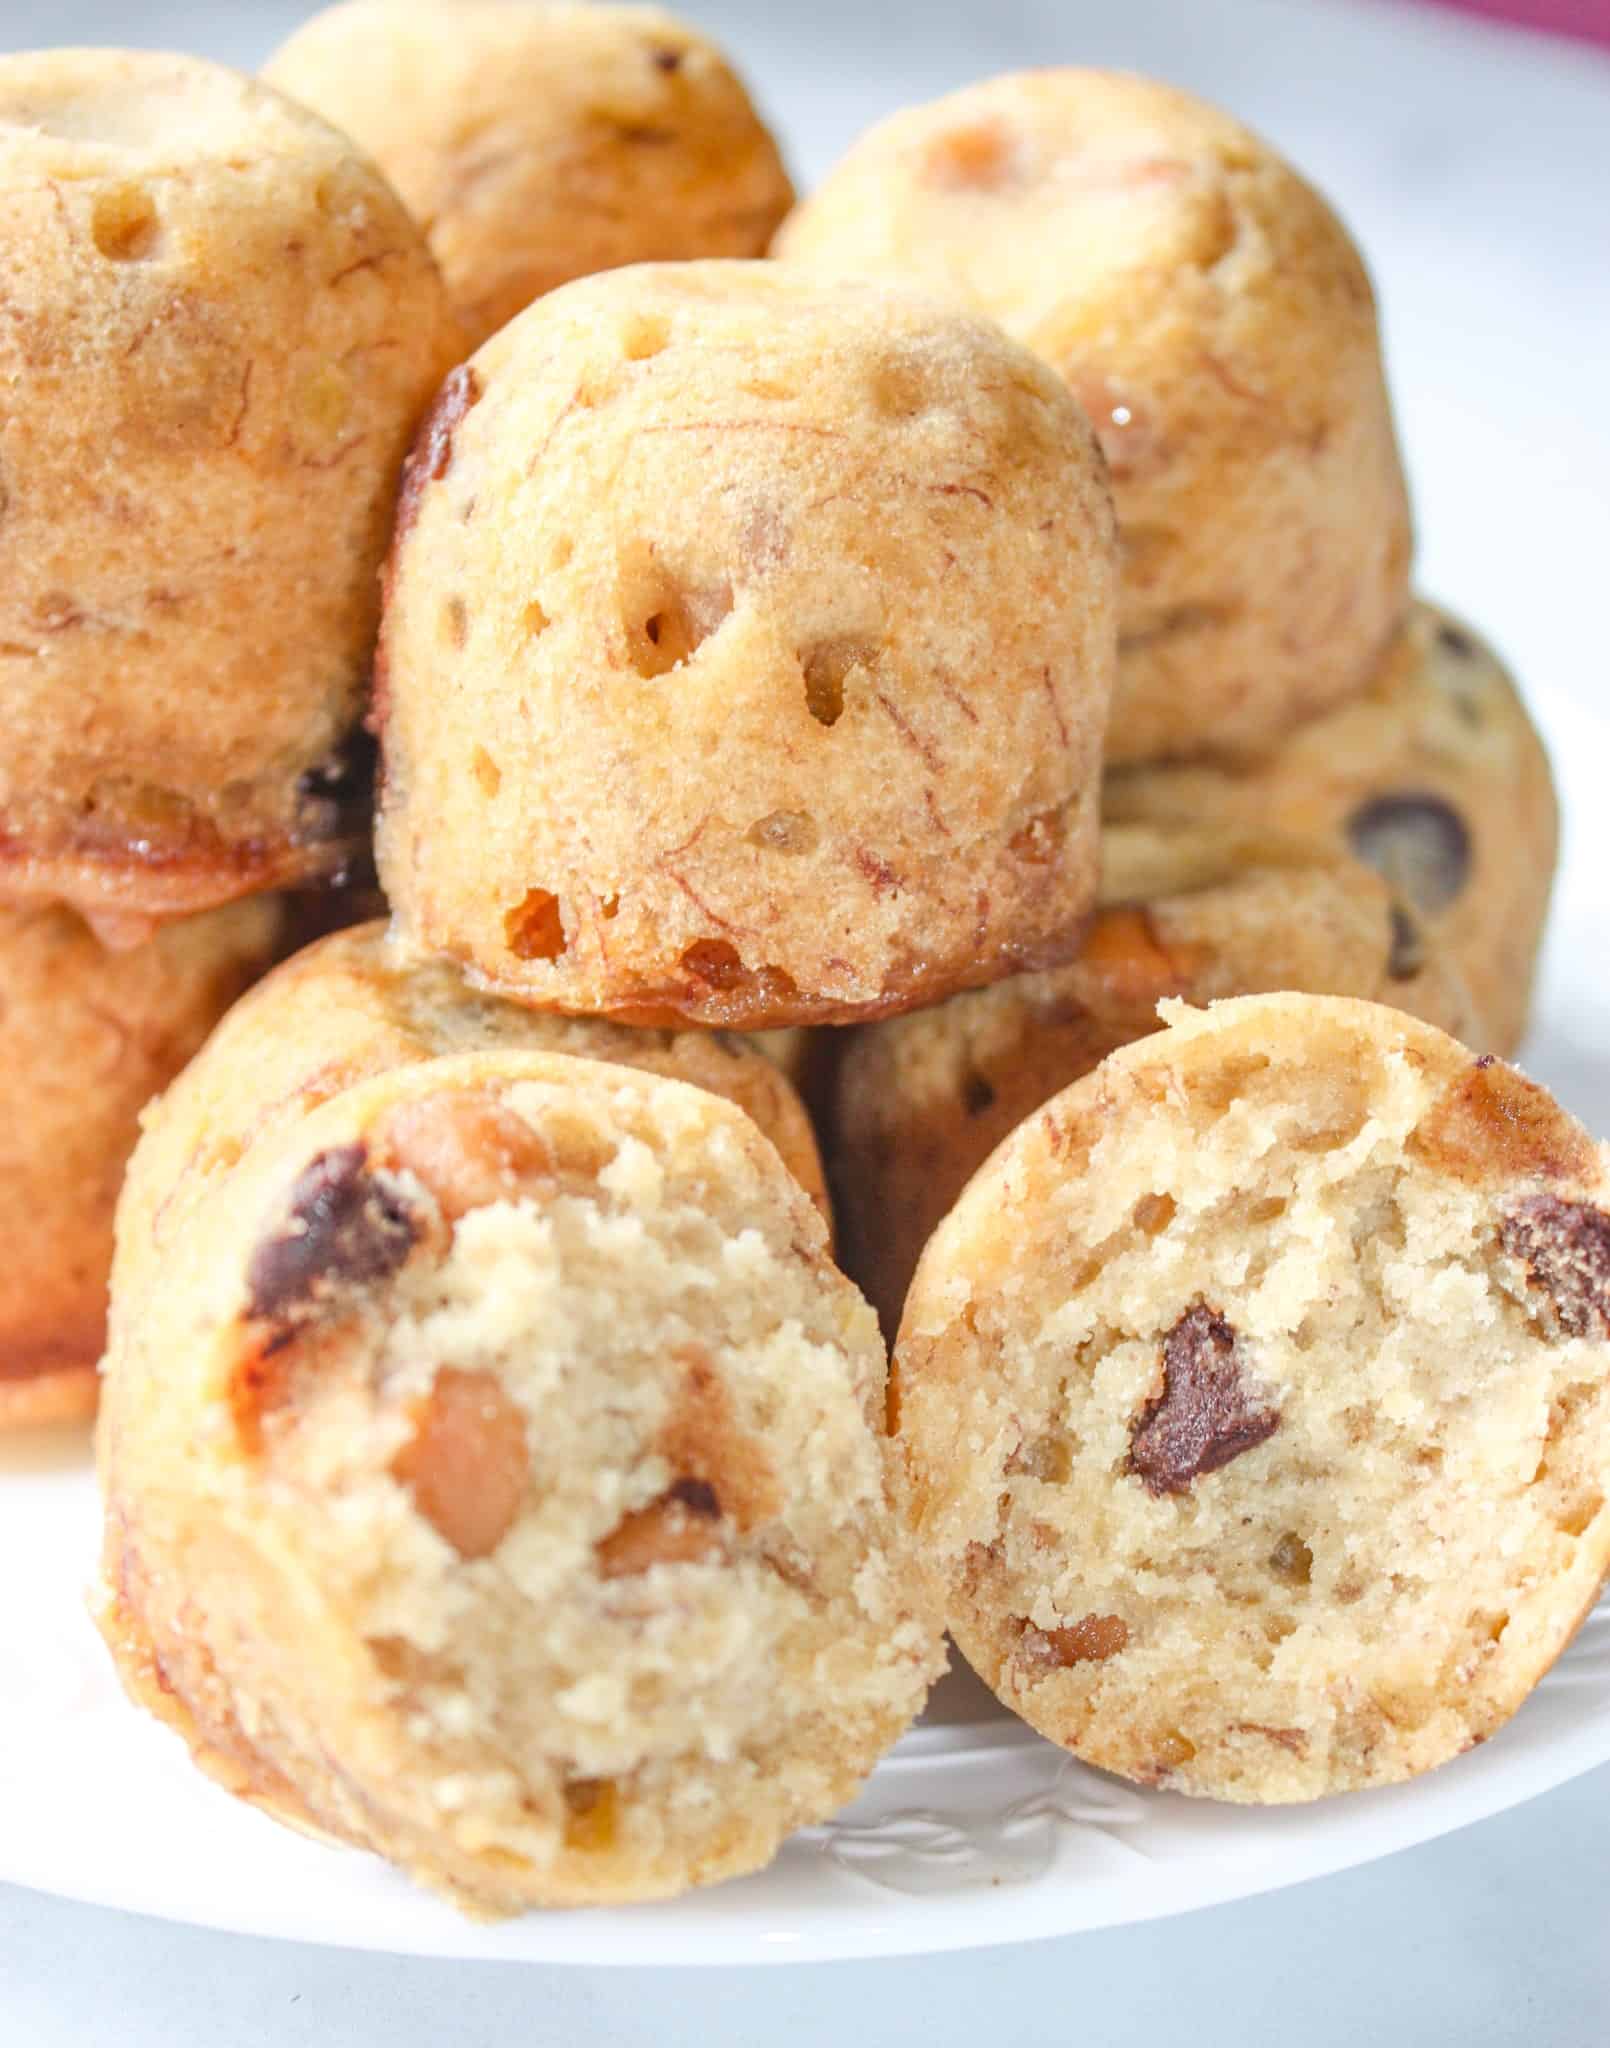 Instant Pot Peanut Butter Banana Bites are an easy pressure cooker snack.  These gluten free "bites" are a flavourful muffin variation that your whole family will enjoy!